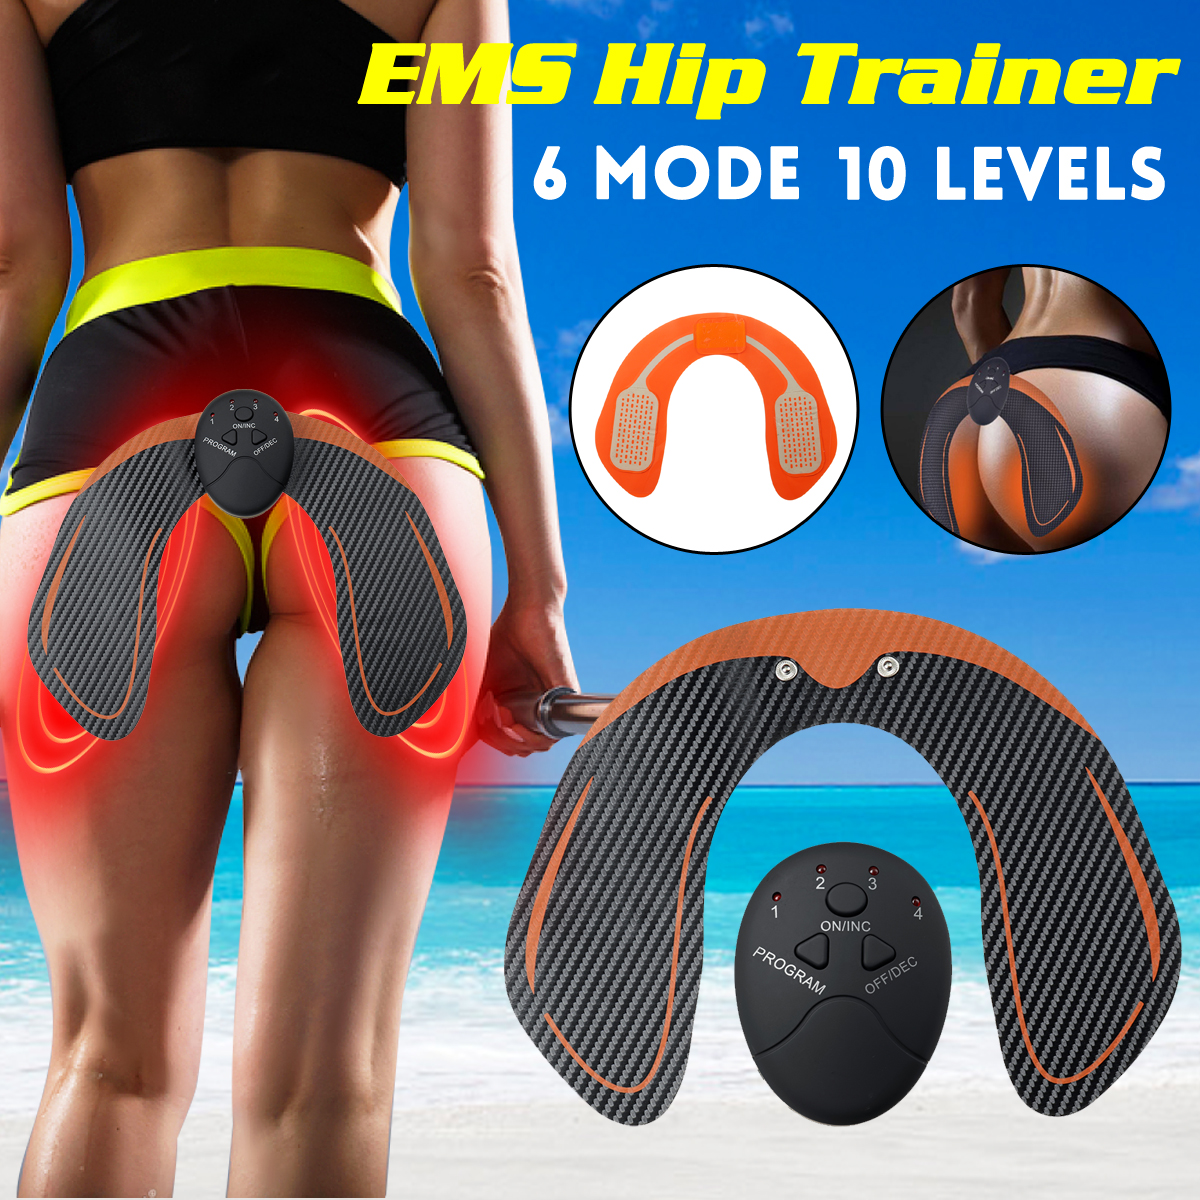 EMS-Smart-Hip-Waist-Trainer-6-Modes-10-Levels-Butt-Lifting-Muscle-Fitness-Slimming-Device-1719608-2